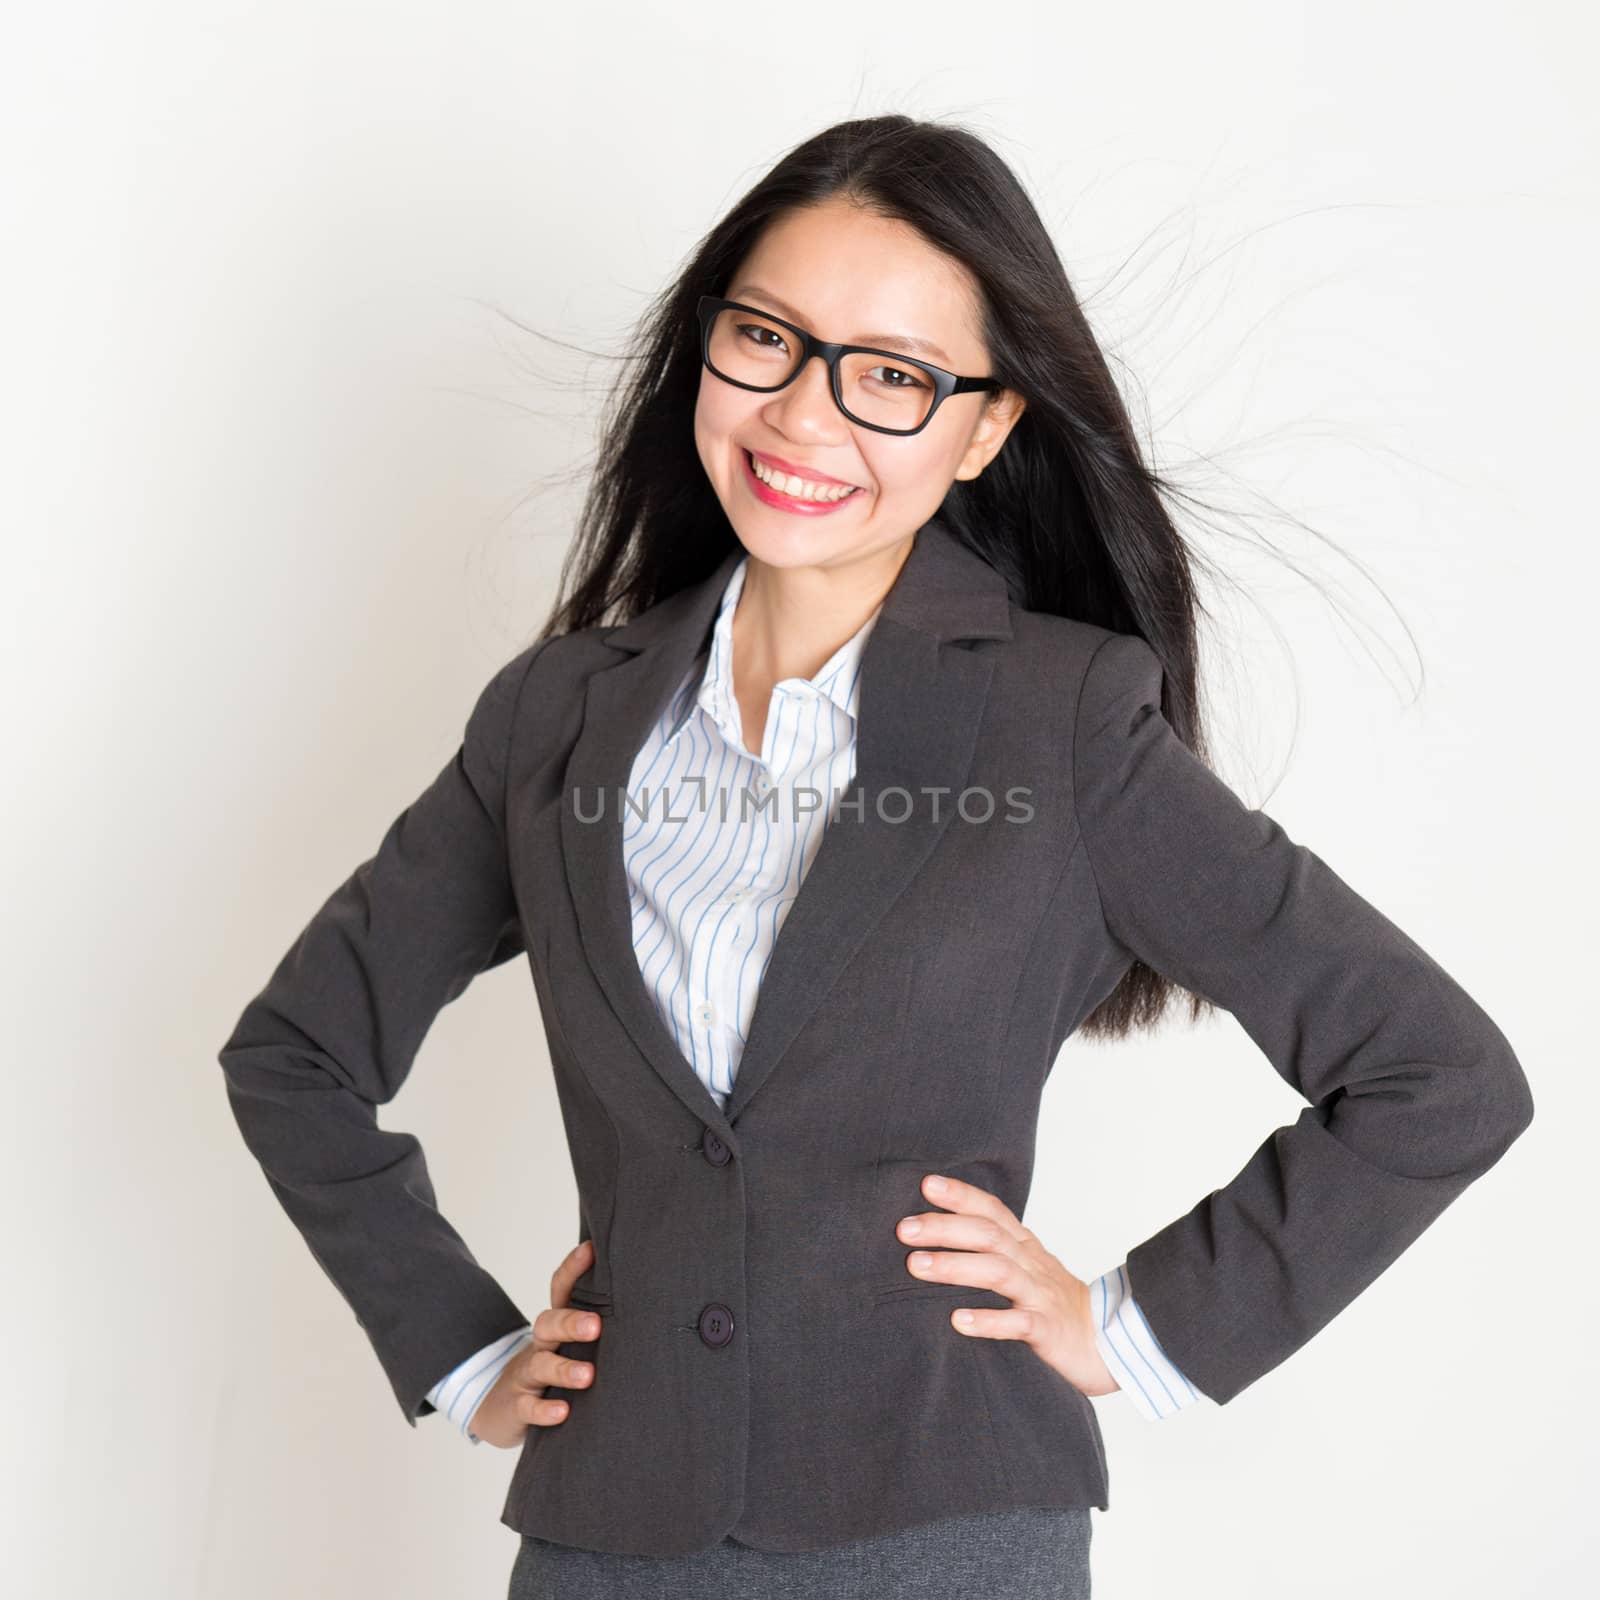 Portrait of young Asian business woman in formalwear smiling and looking at camera, standing on plain background.